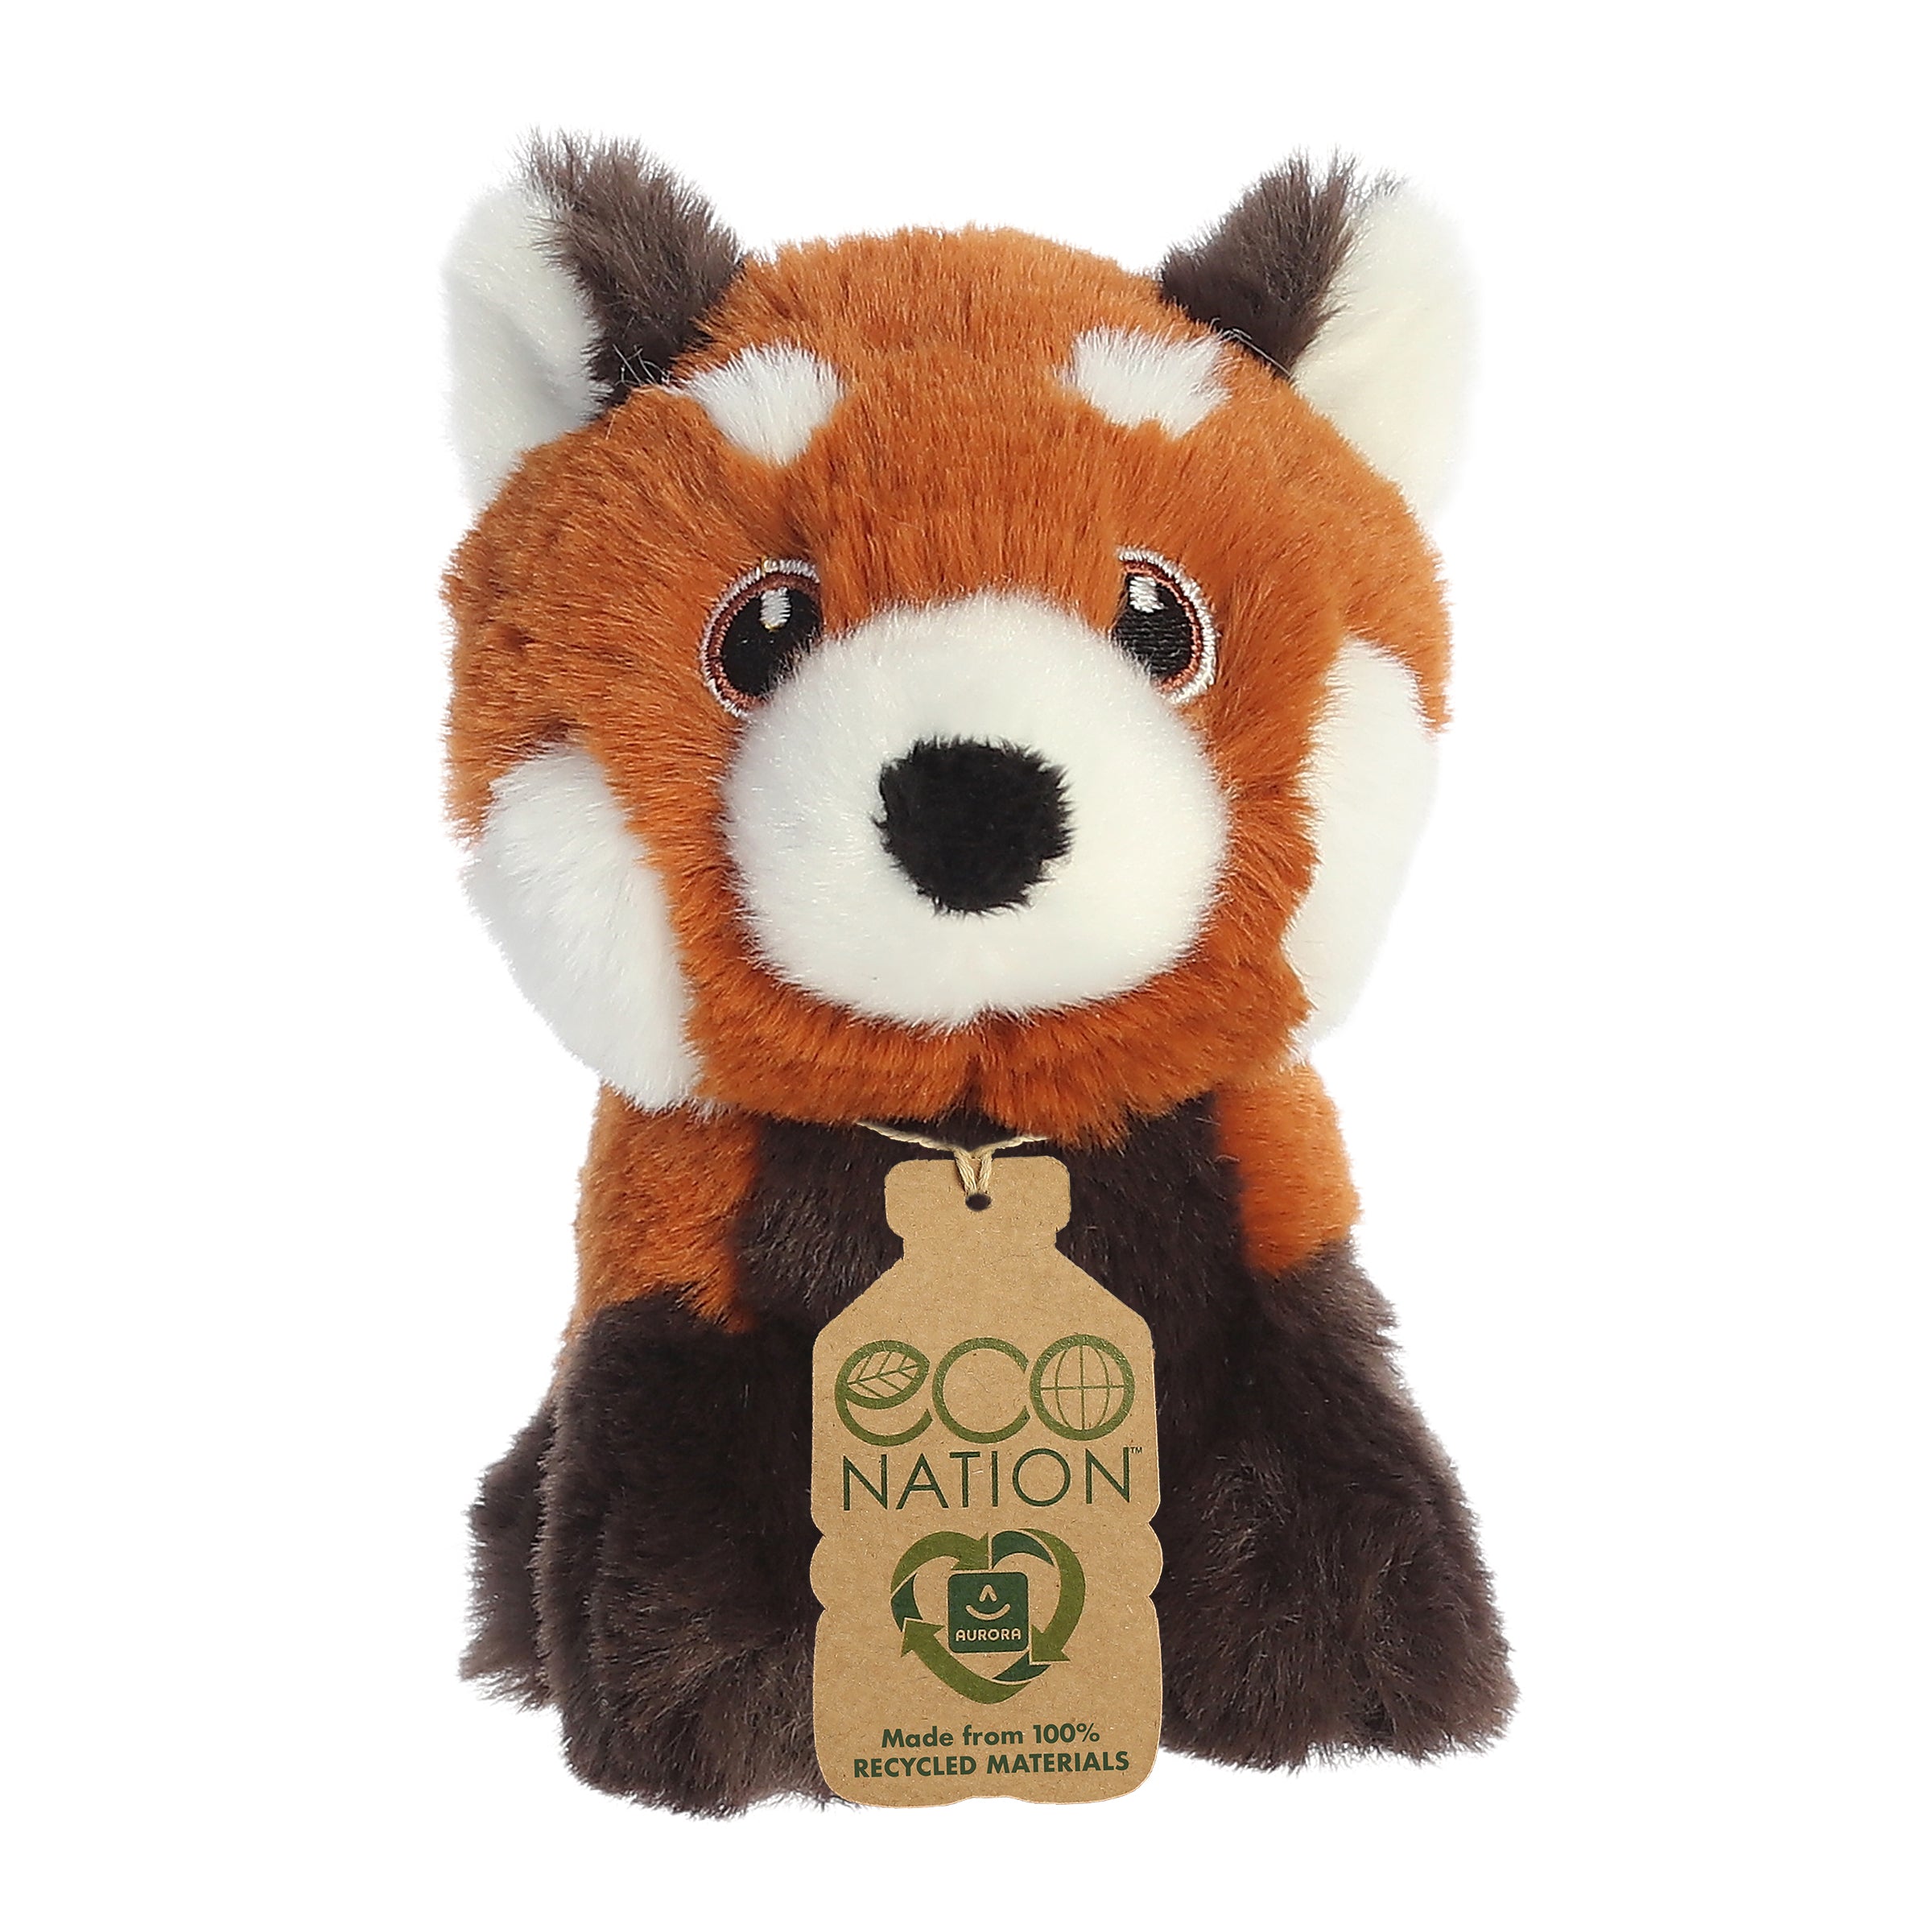 A lovely red panda plush with a combination of orange-brown, white, and black fur throughout, with an eco-nation tag.